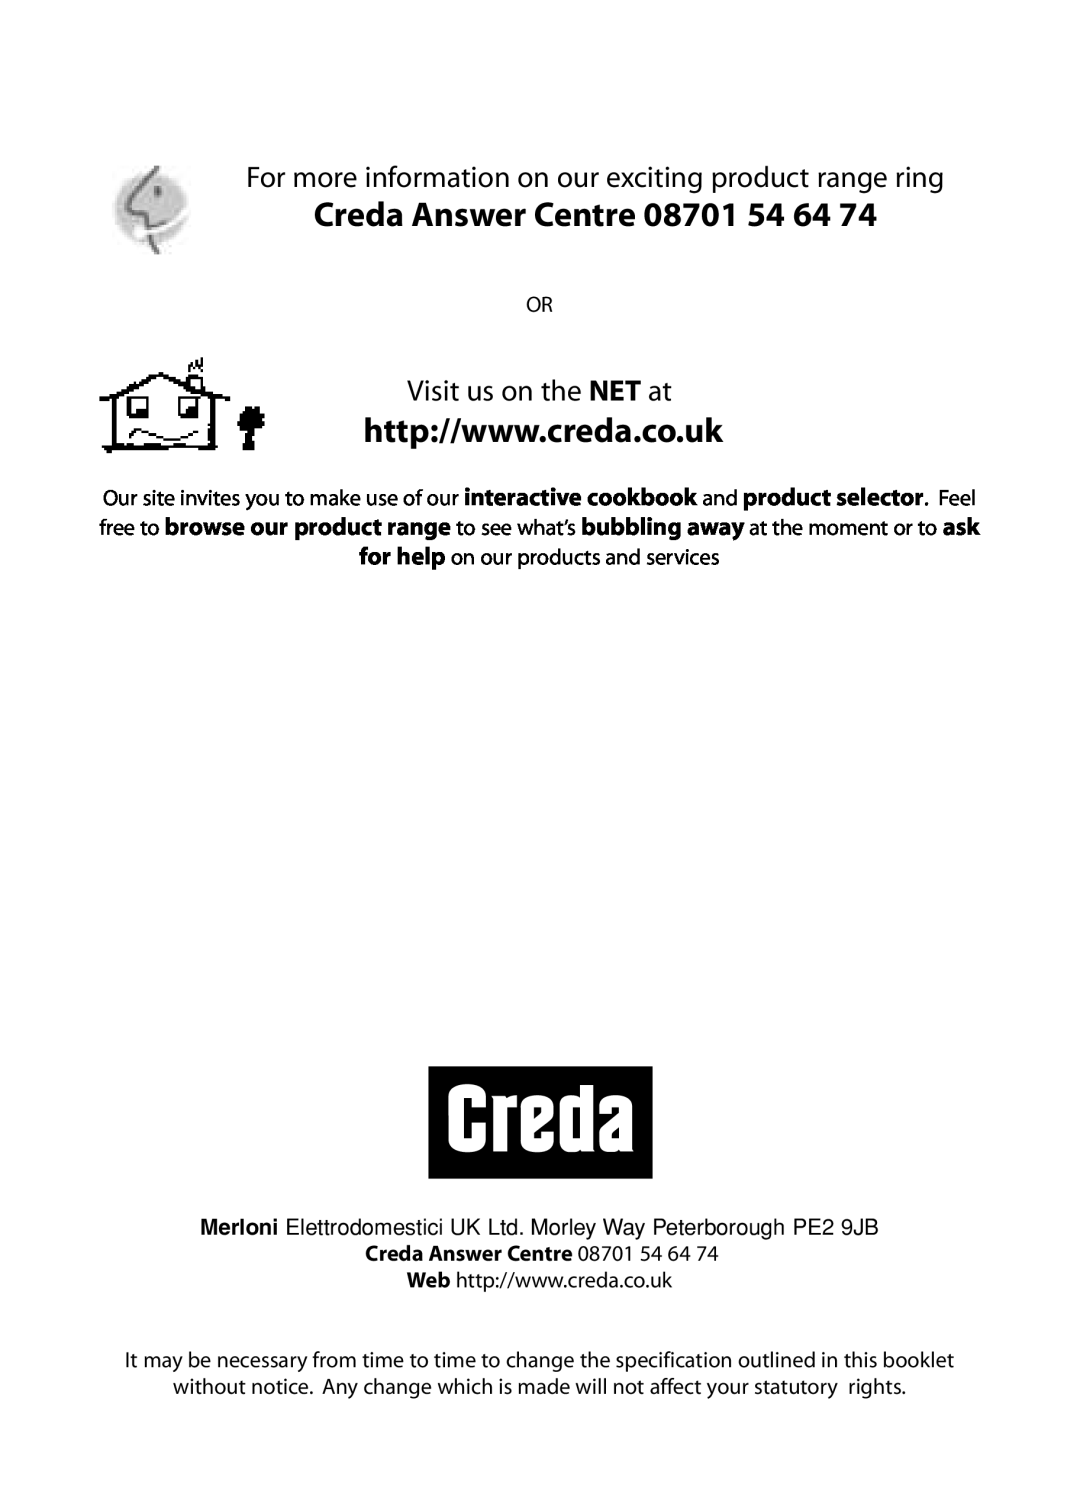 Creda C261E, C461E, C361E, R365E Creda Answer Centre 08701 54 64, For more information on our exciting product range ring 